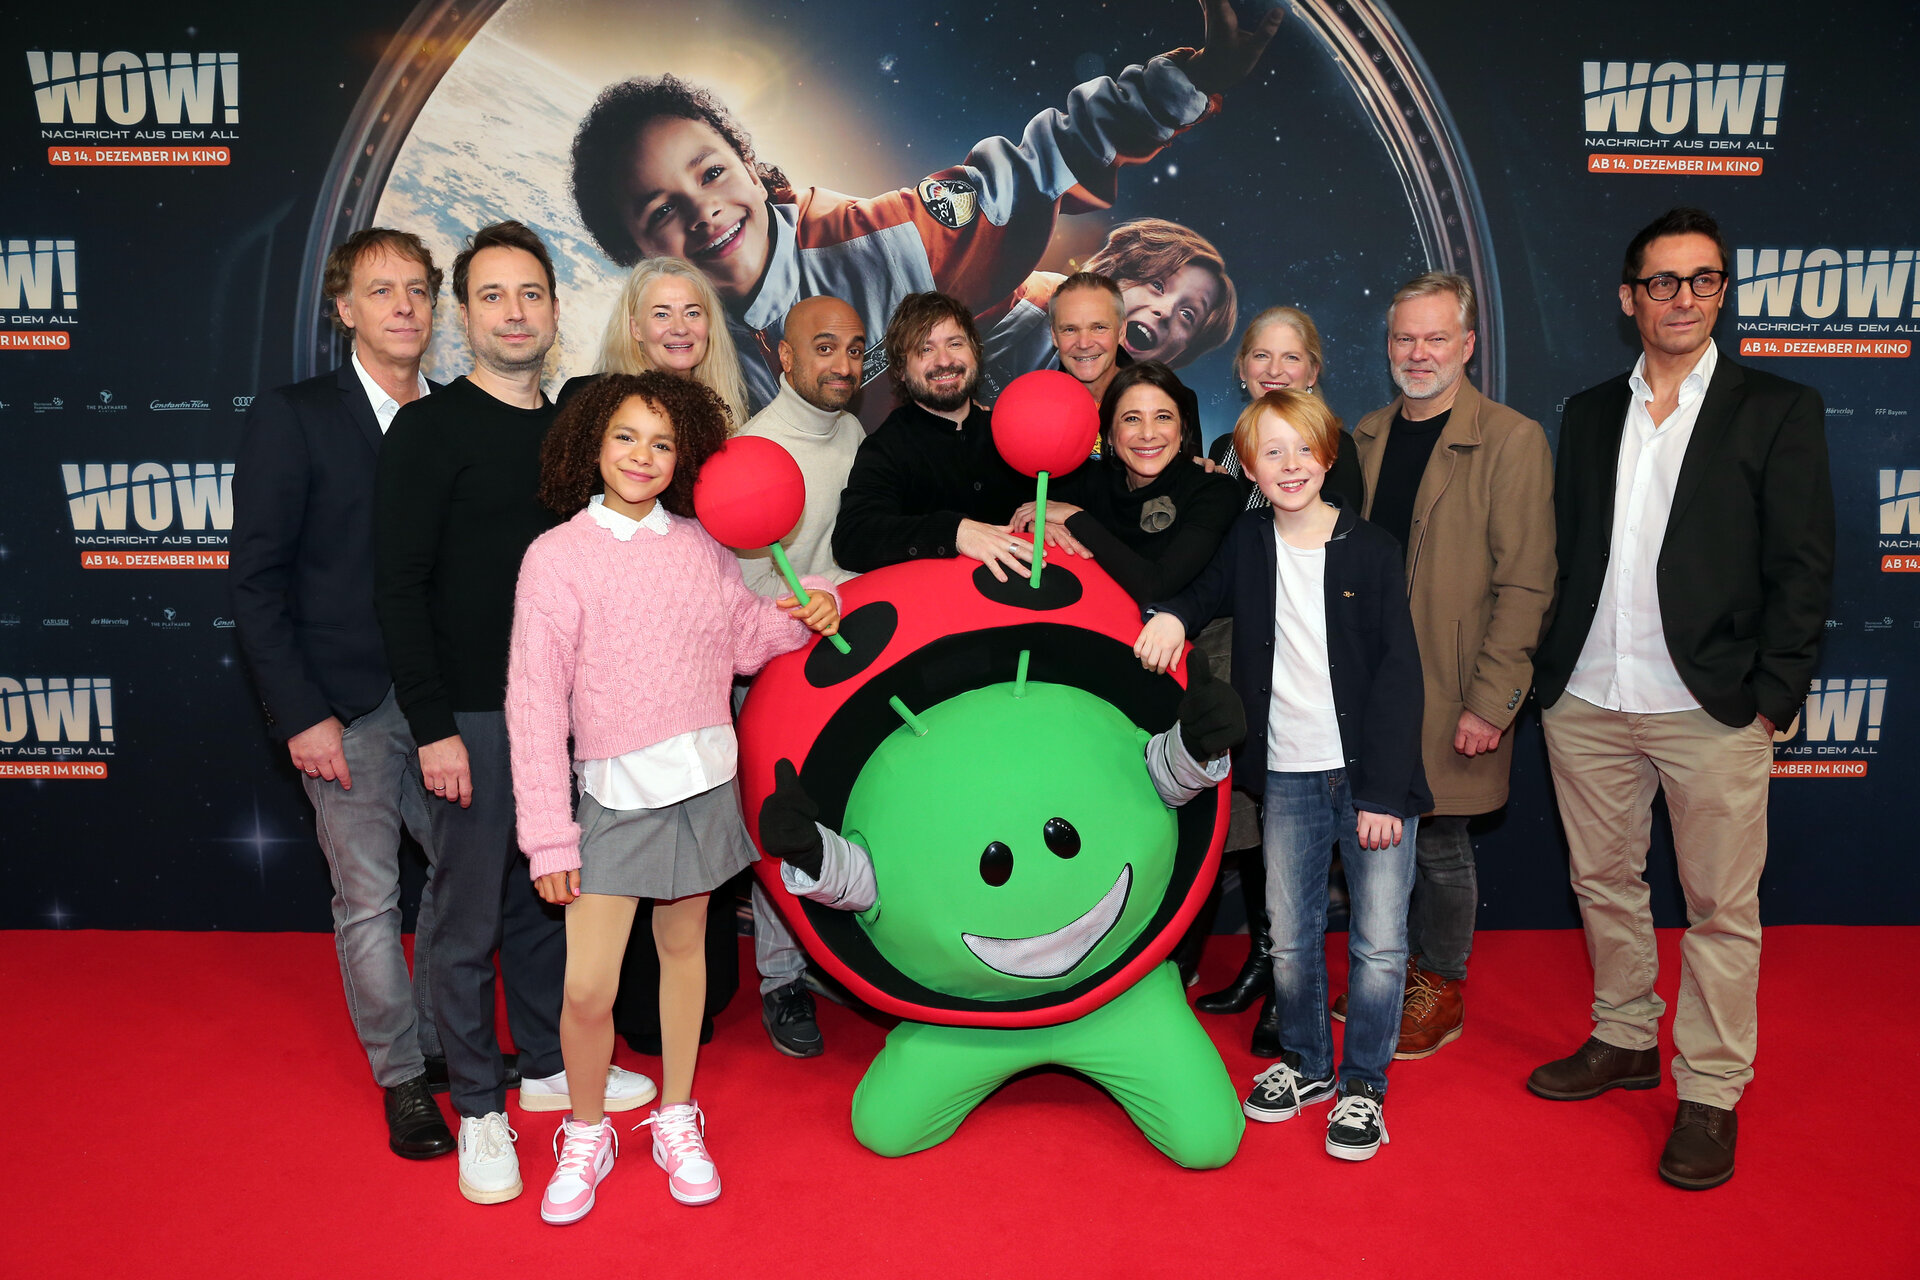 ESA's mascot Paxi at the movie premiere of Wow! Message from Outer Space.